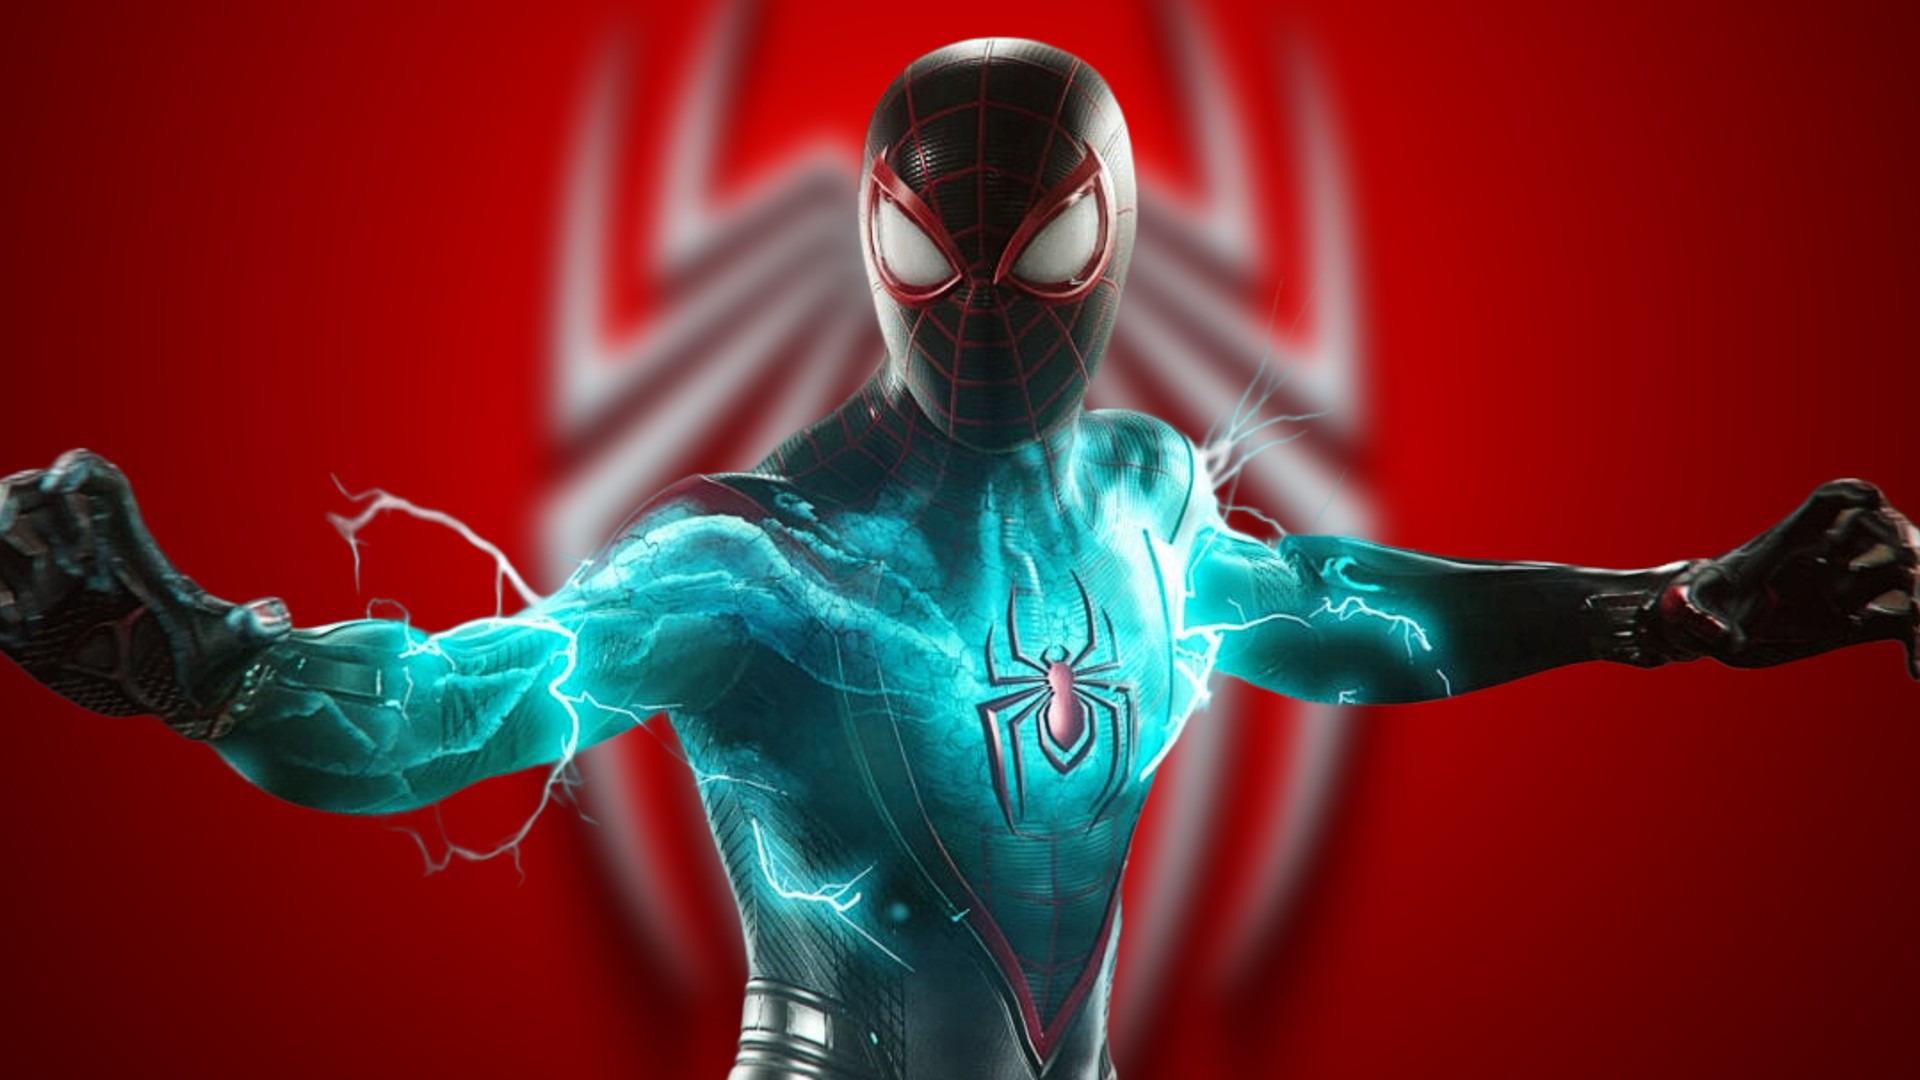 ultimate spider man game costumes